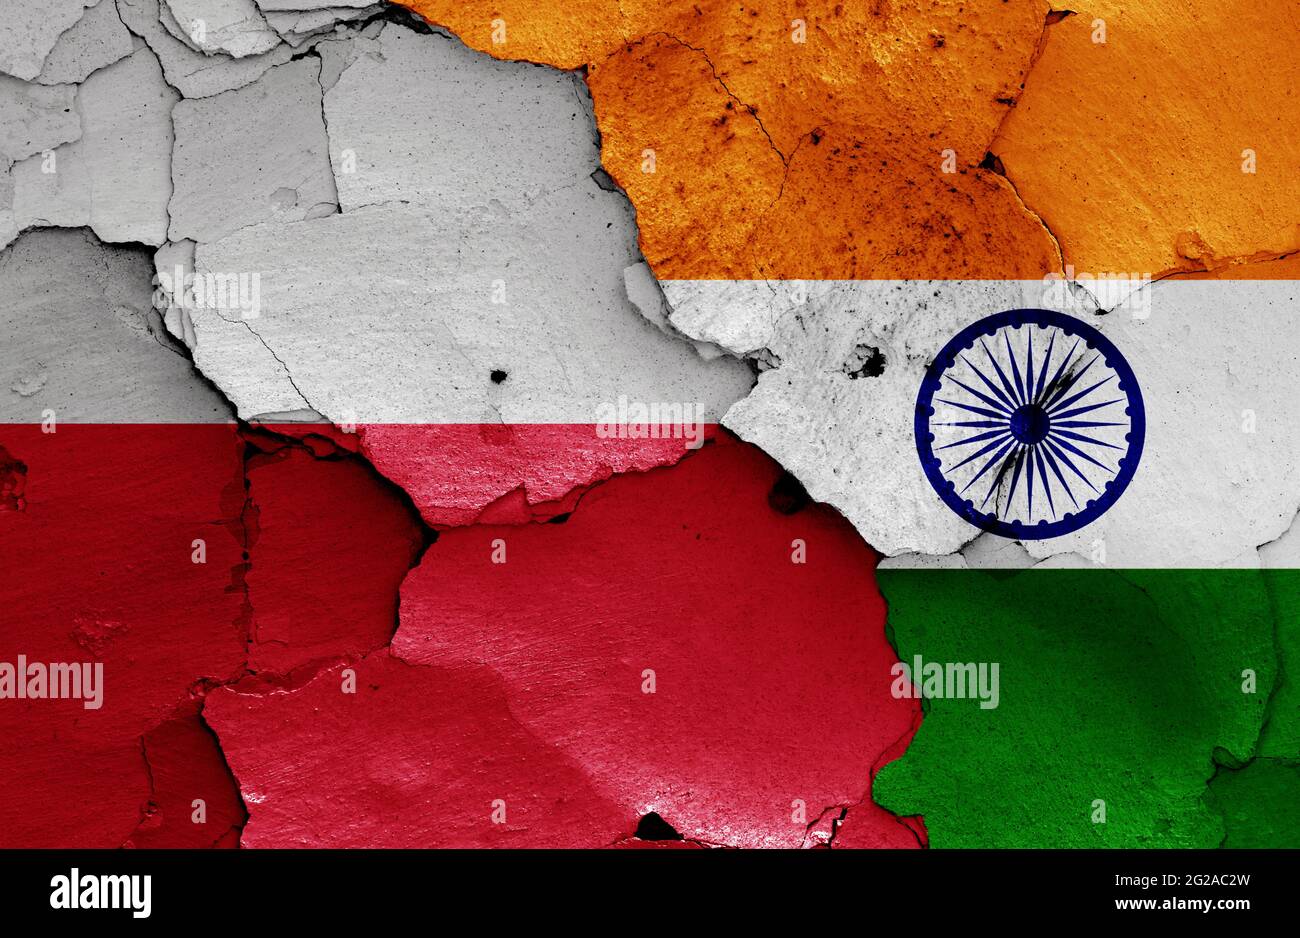 flags of Poland and India painted on cracked wall Stock Photo